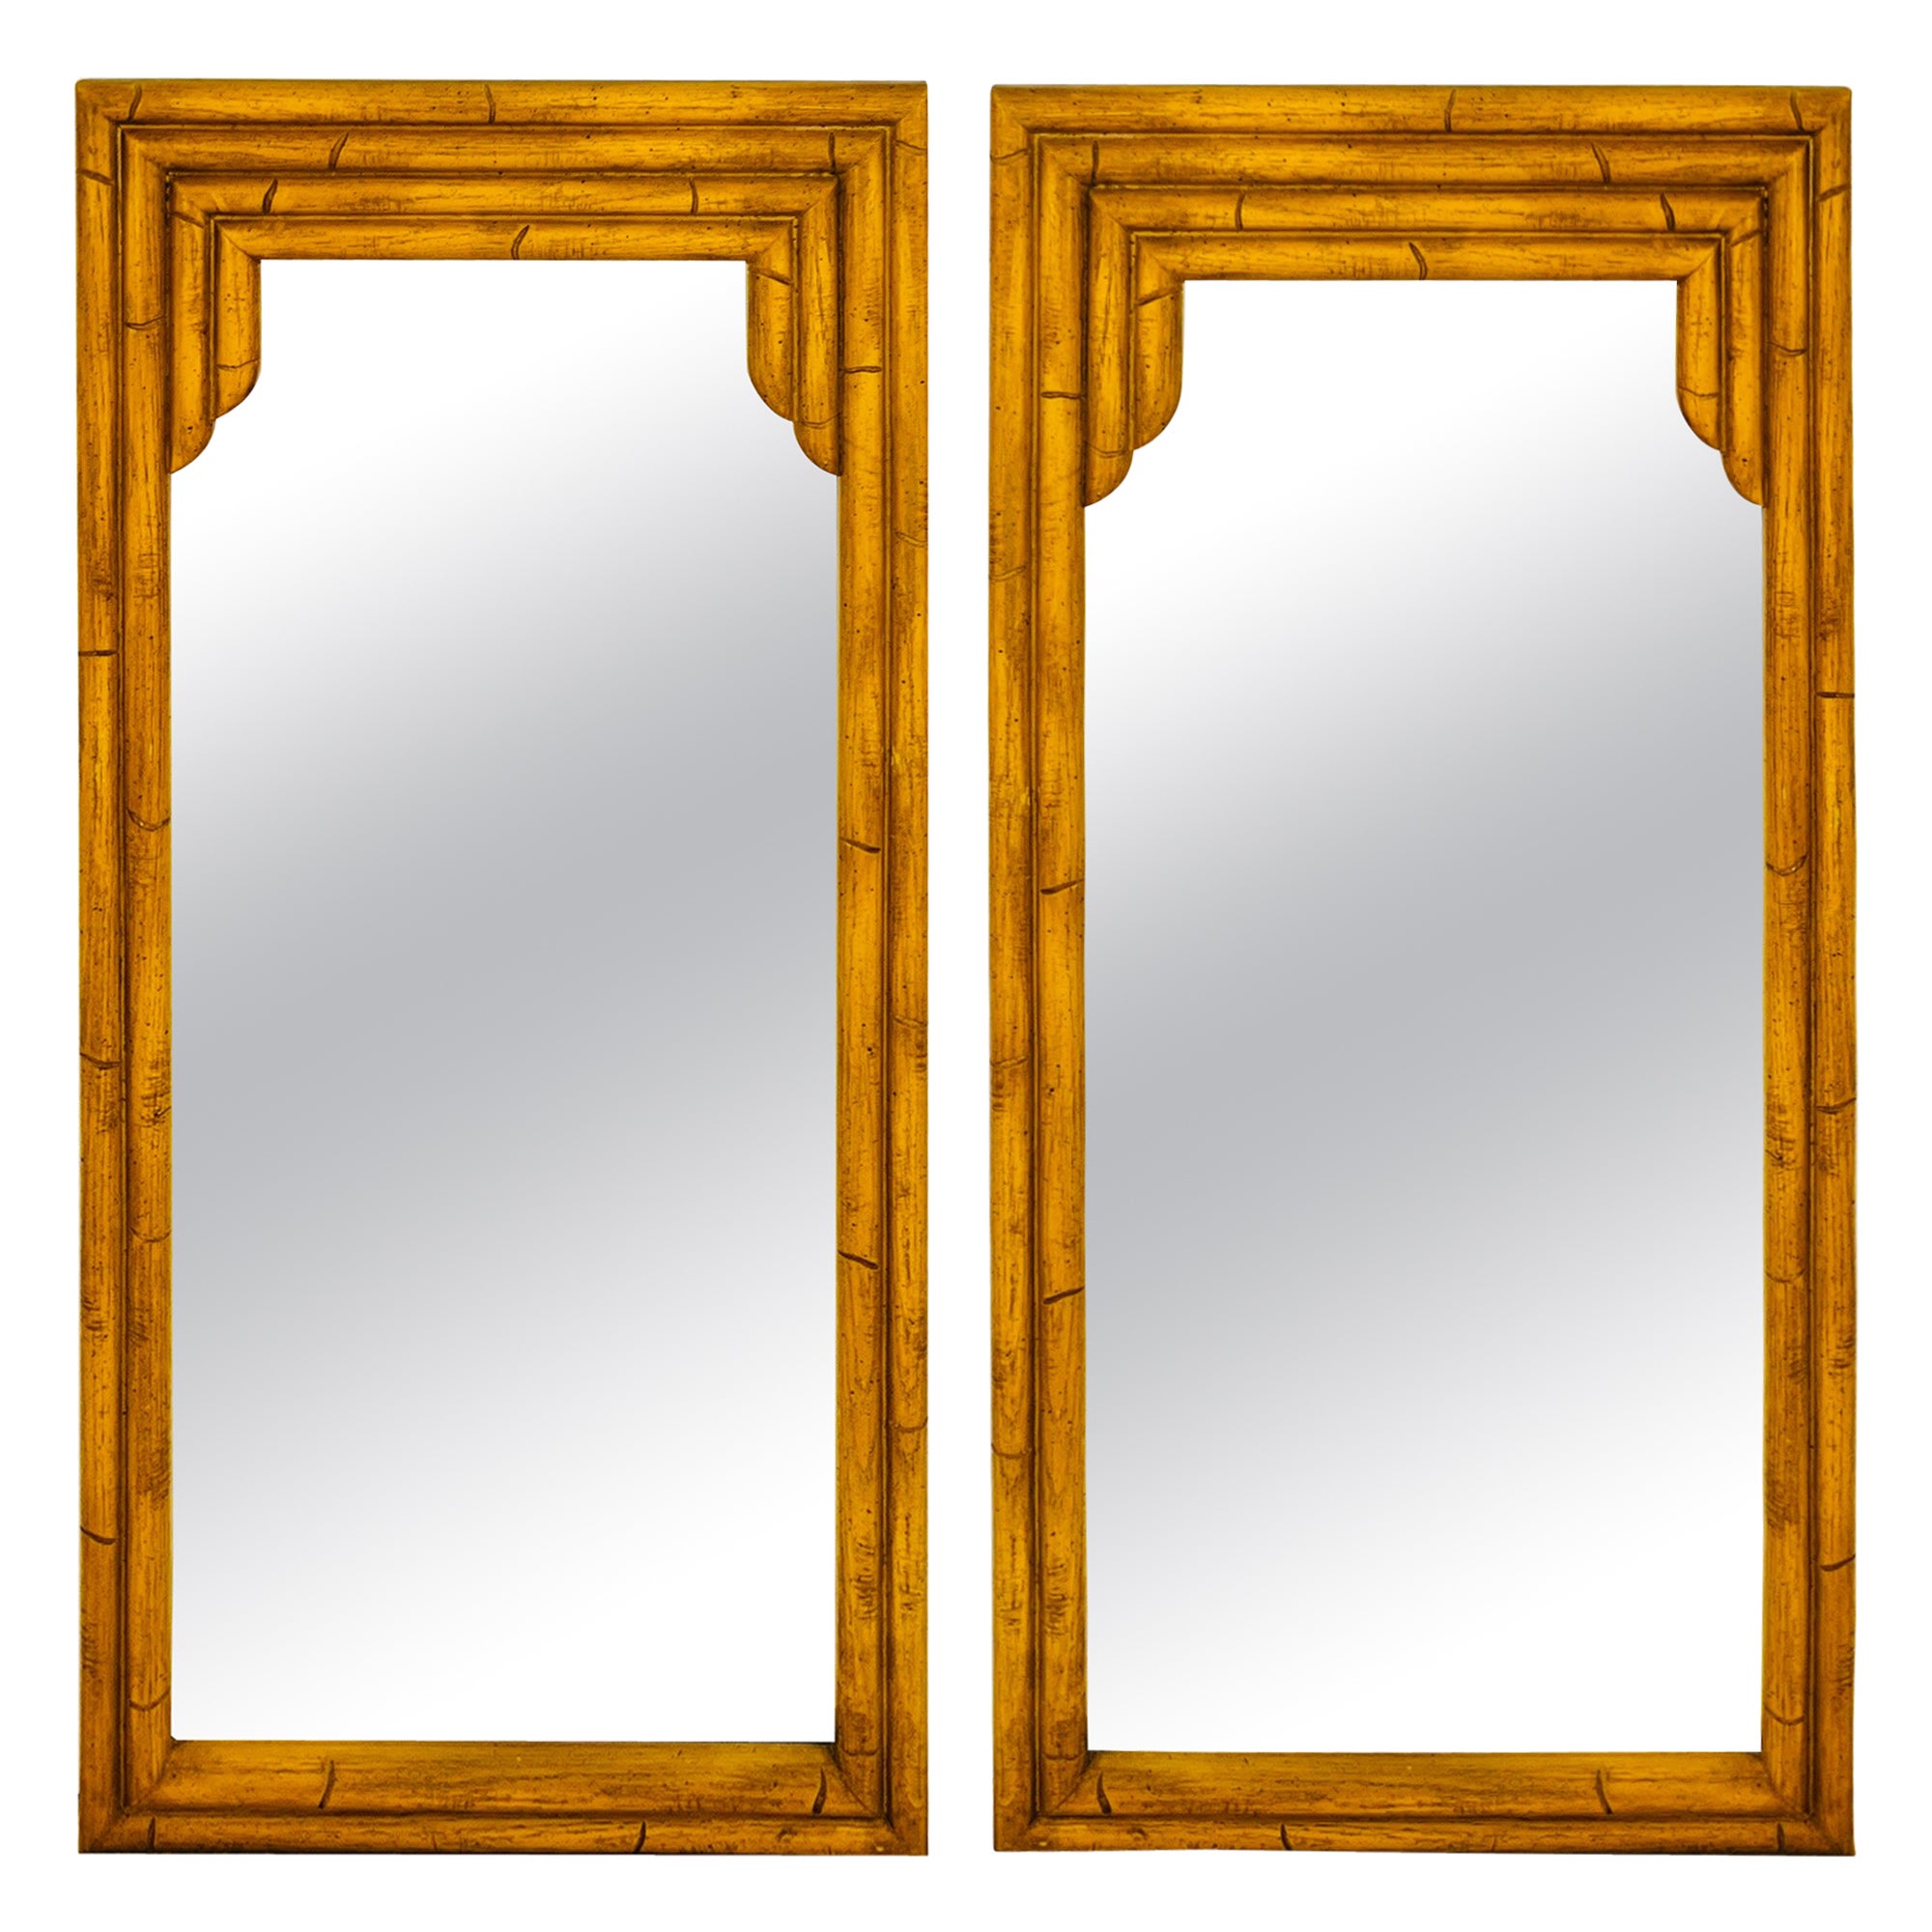 Pair of Pagoda Bamboo Mirrors In Wood and Resin, c. 1970's For Sale